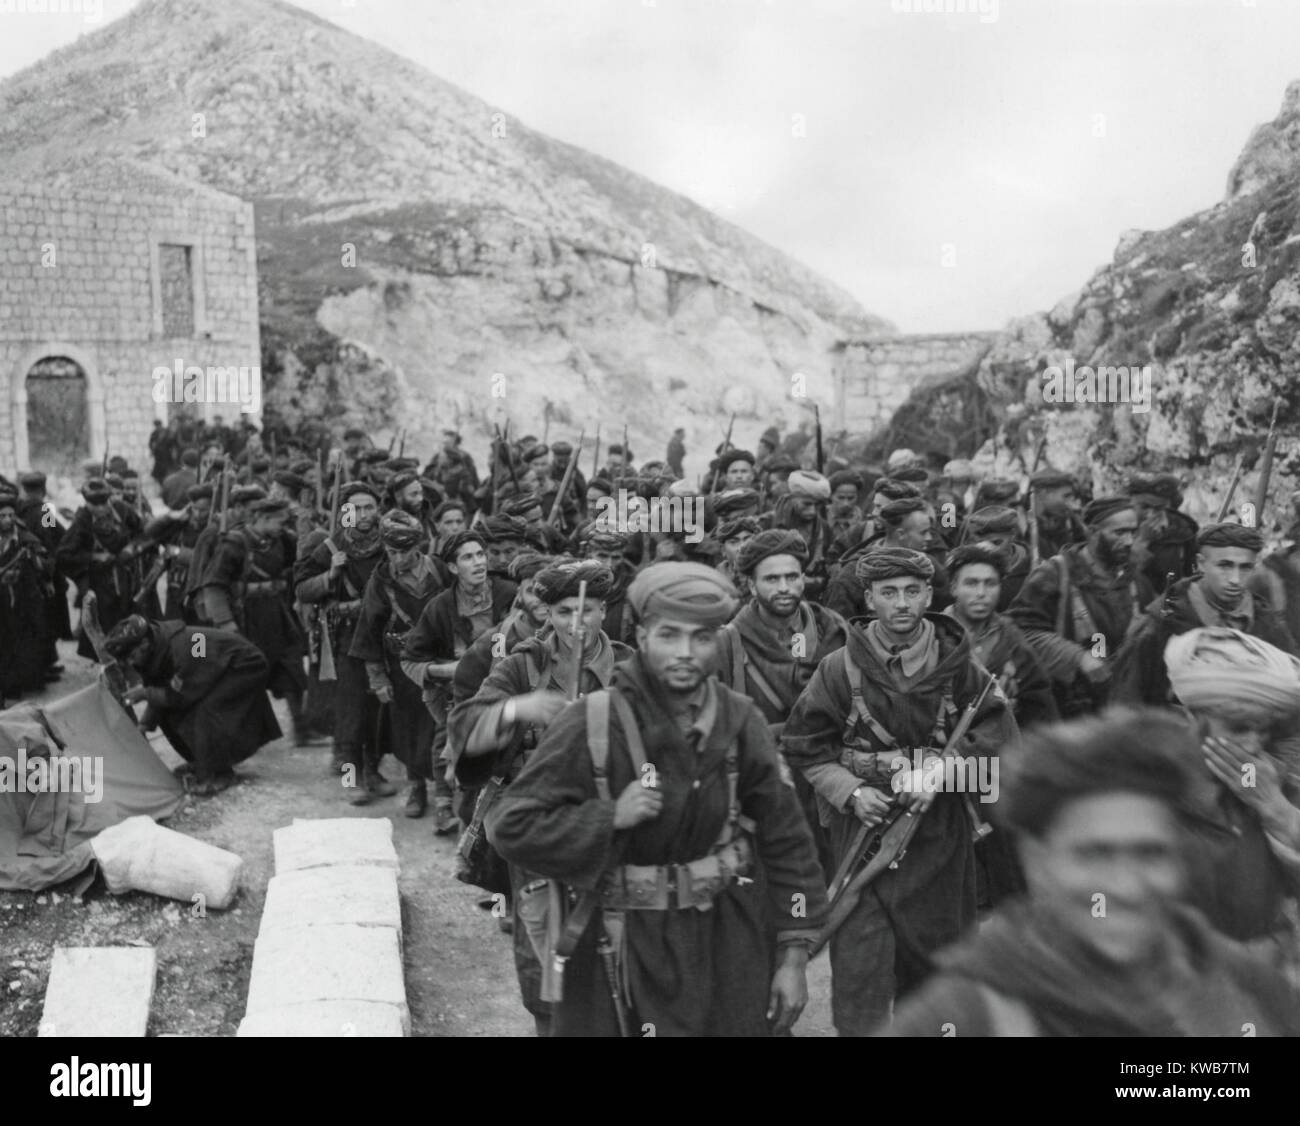 French Moroccan Soldiers, called 'Goums', in Letino, Italy (Caserta province, north of Naples). 2nd Moroccan Division, VI Corps, wear traditional uniforms and carry American equipment. Dec. 7, 1943. World War 2. (BSLOC_2014_10_27 ) Stock Photo